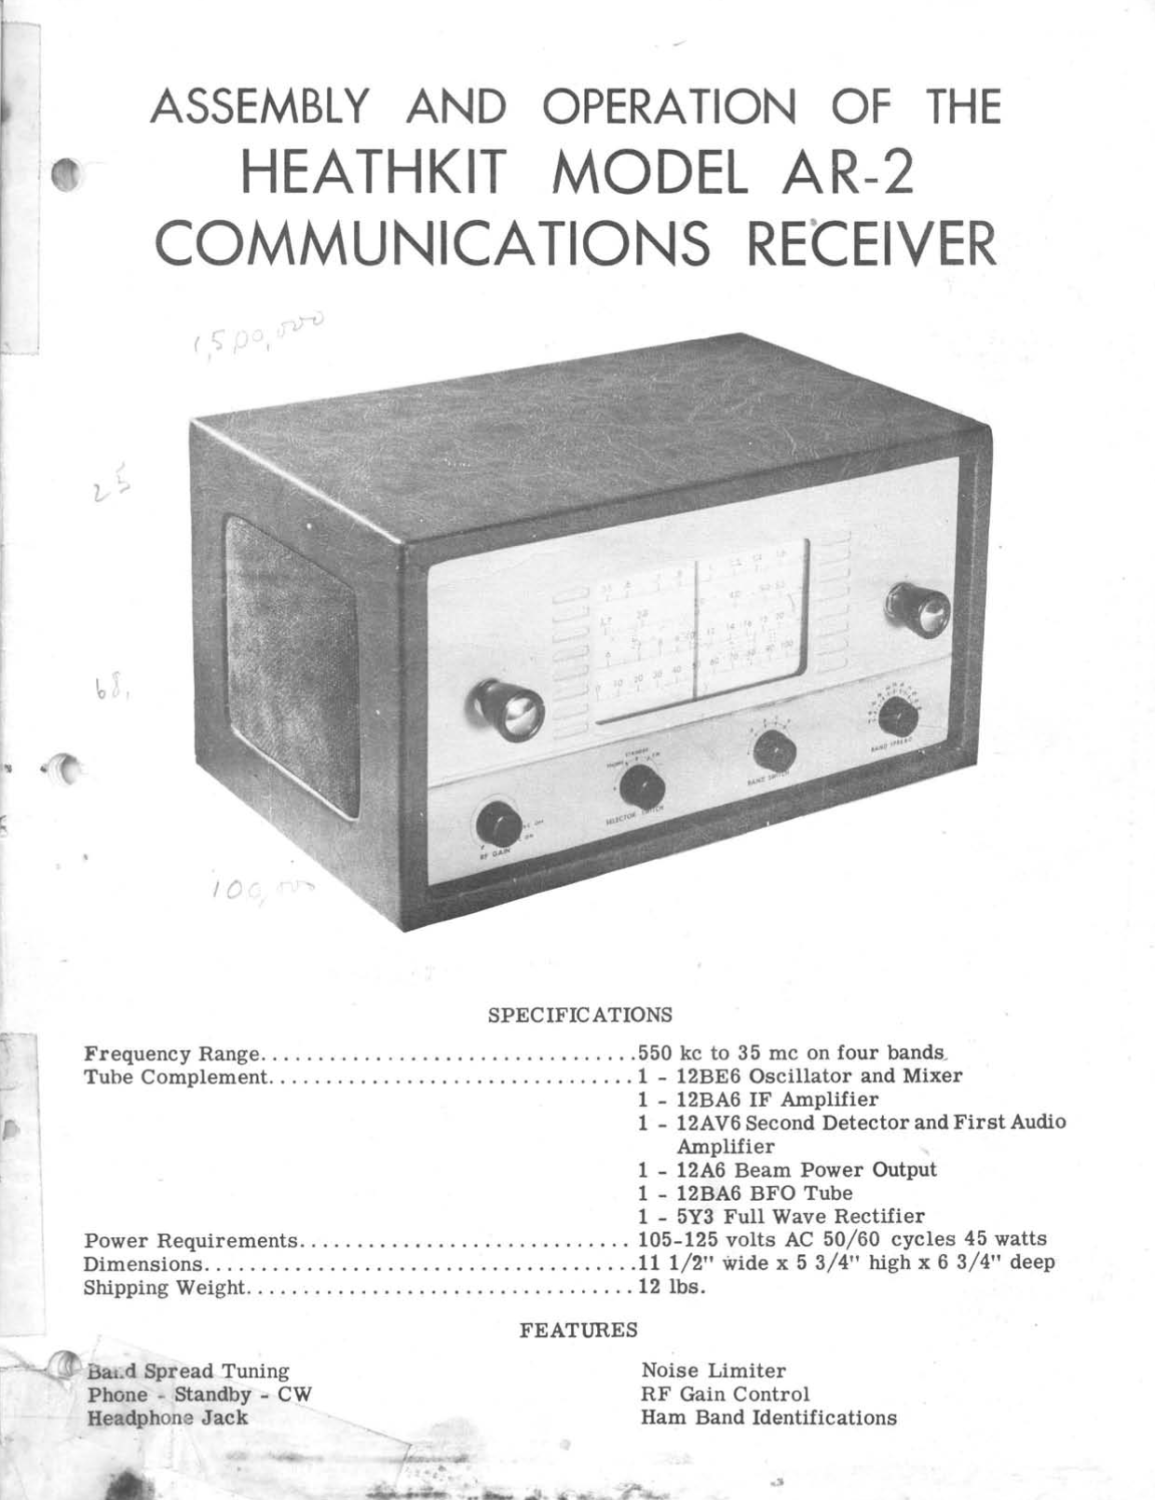 Heathkit AR-2 Communications Receiver - Assembly Instructions